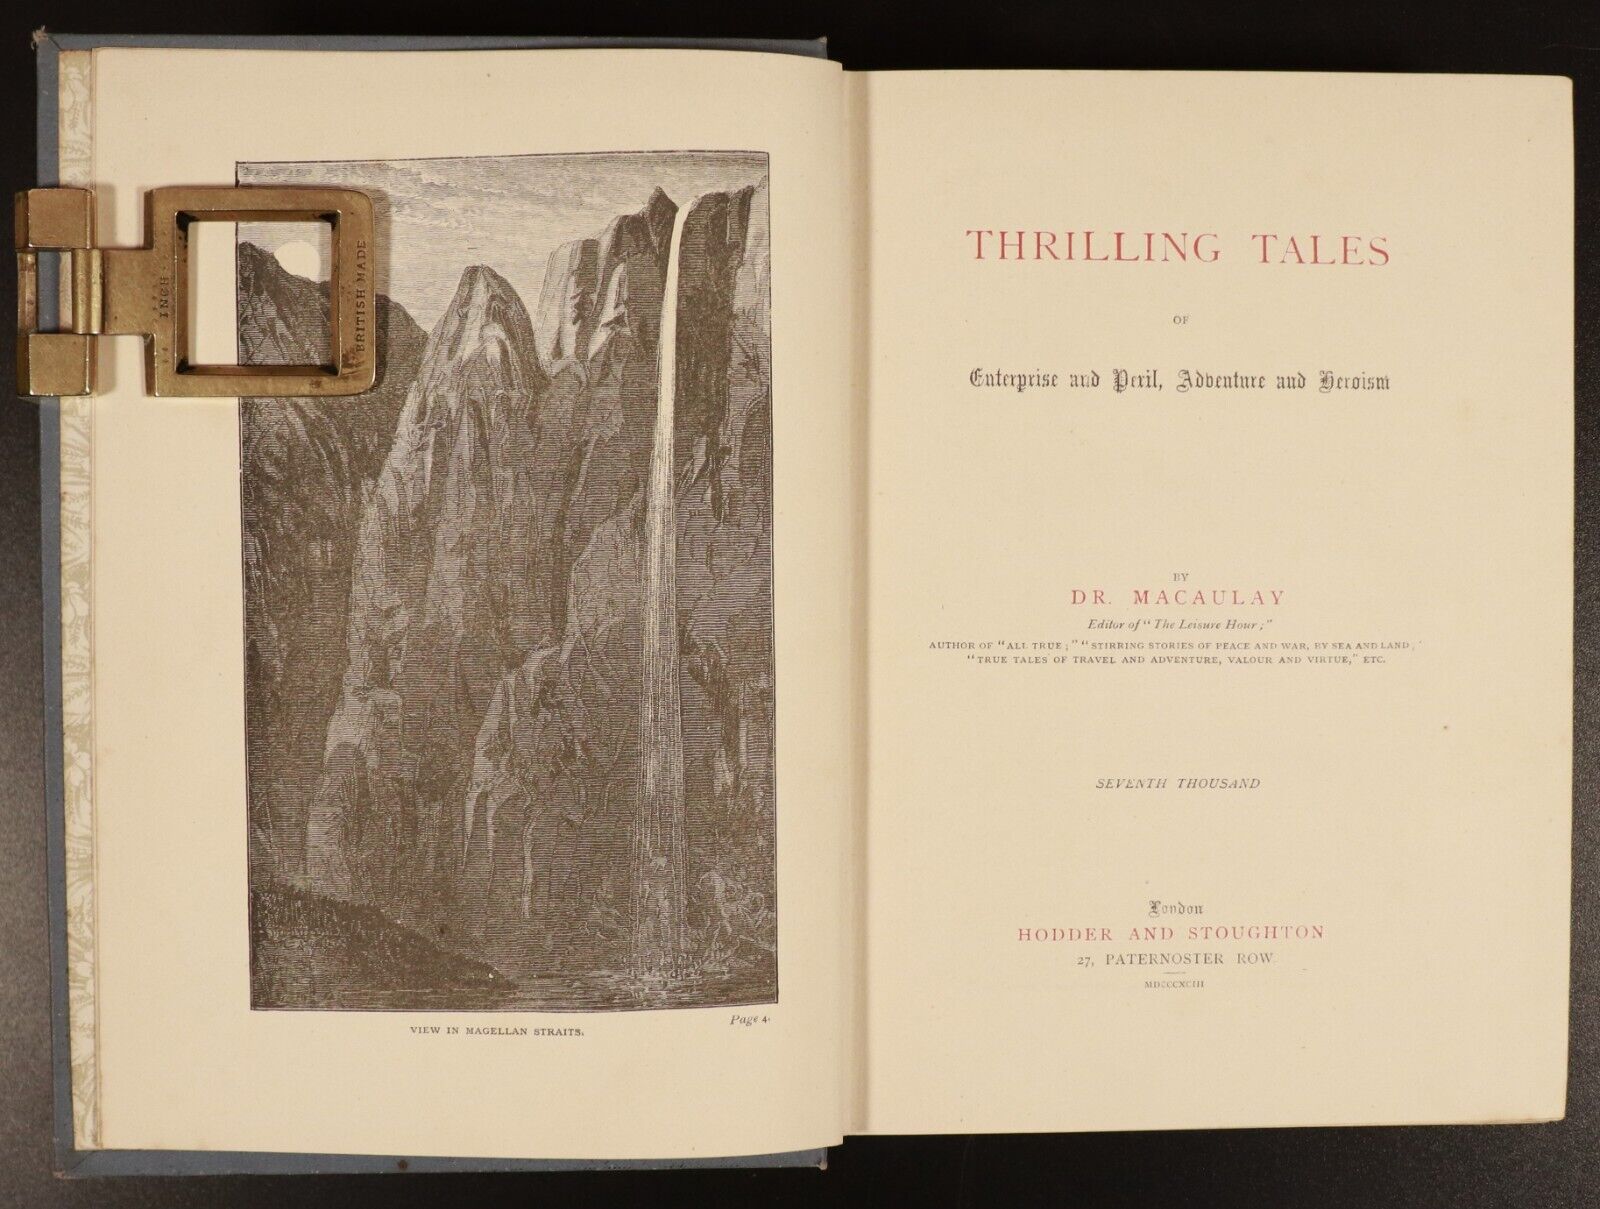 1893 Thrilling Tales by Dr Macaulay Antiquarian Adventure Fiction  Book - 0